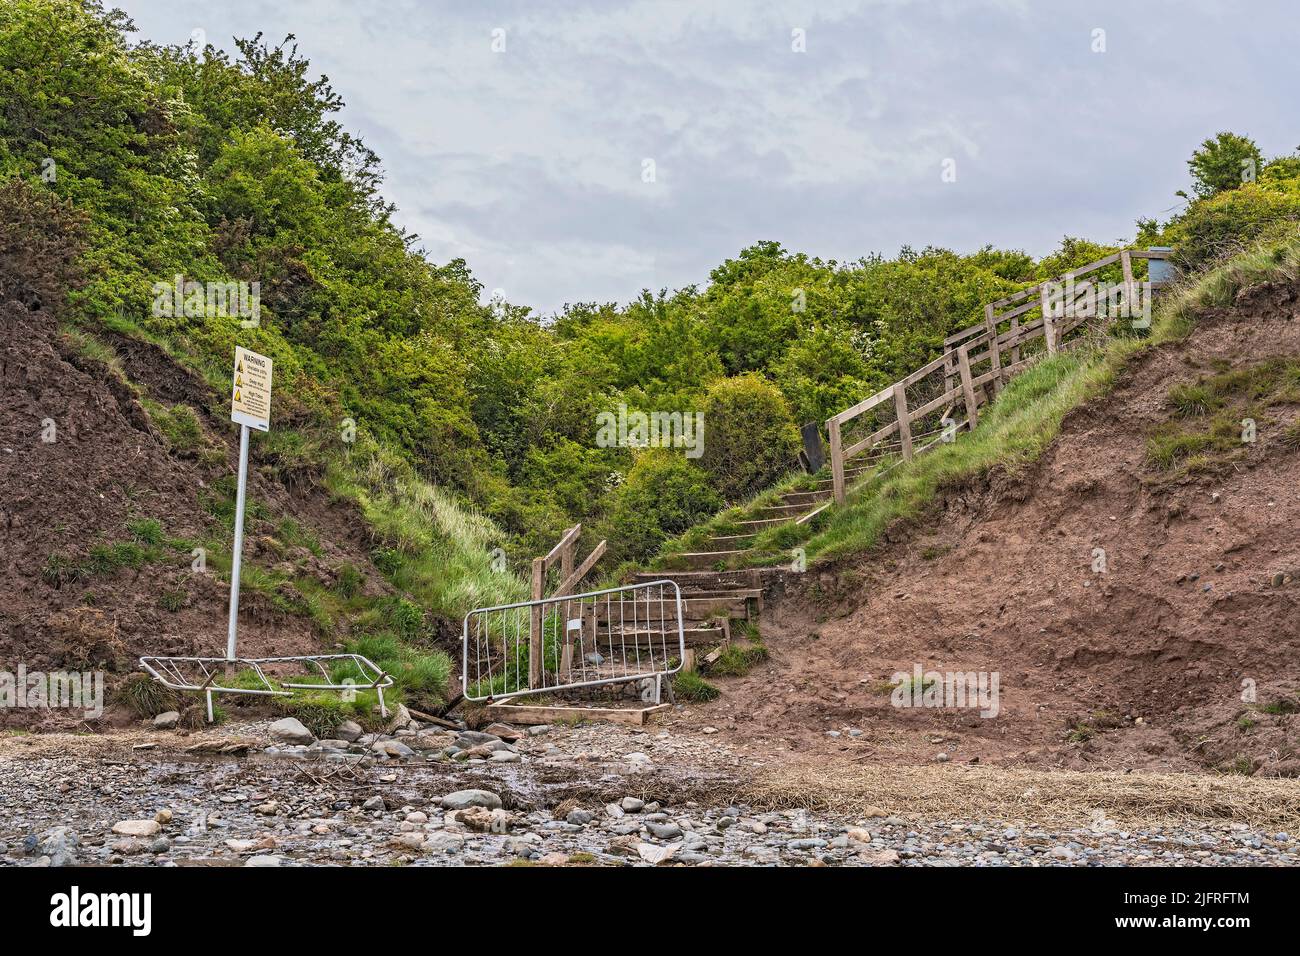 Thurstaston cliffs showing footpath stairs closed off after long period of heavy rain and tidal erosion from below causing colapses River Dee Estuary Stock Photo